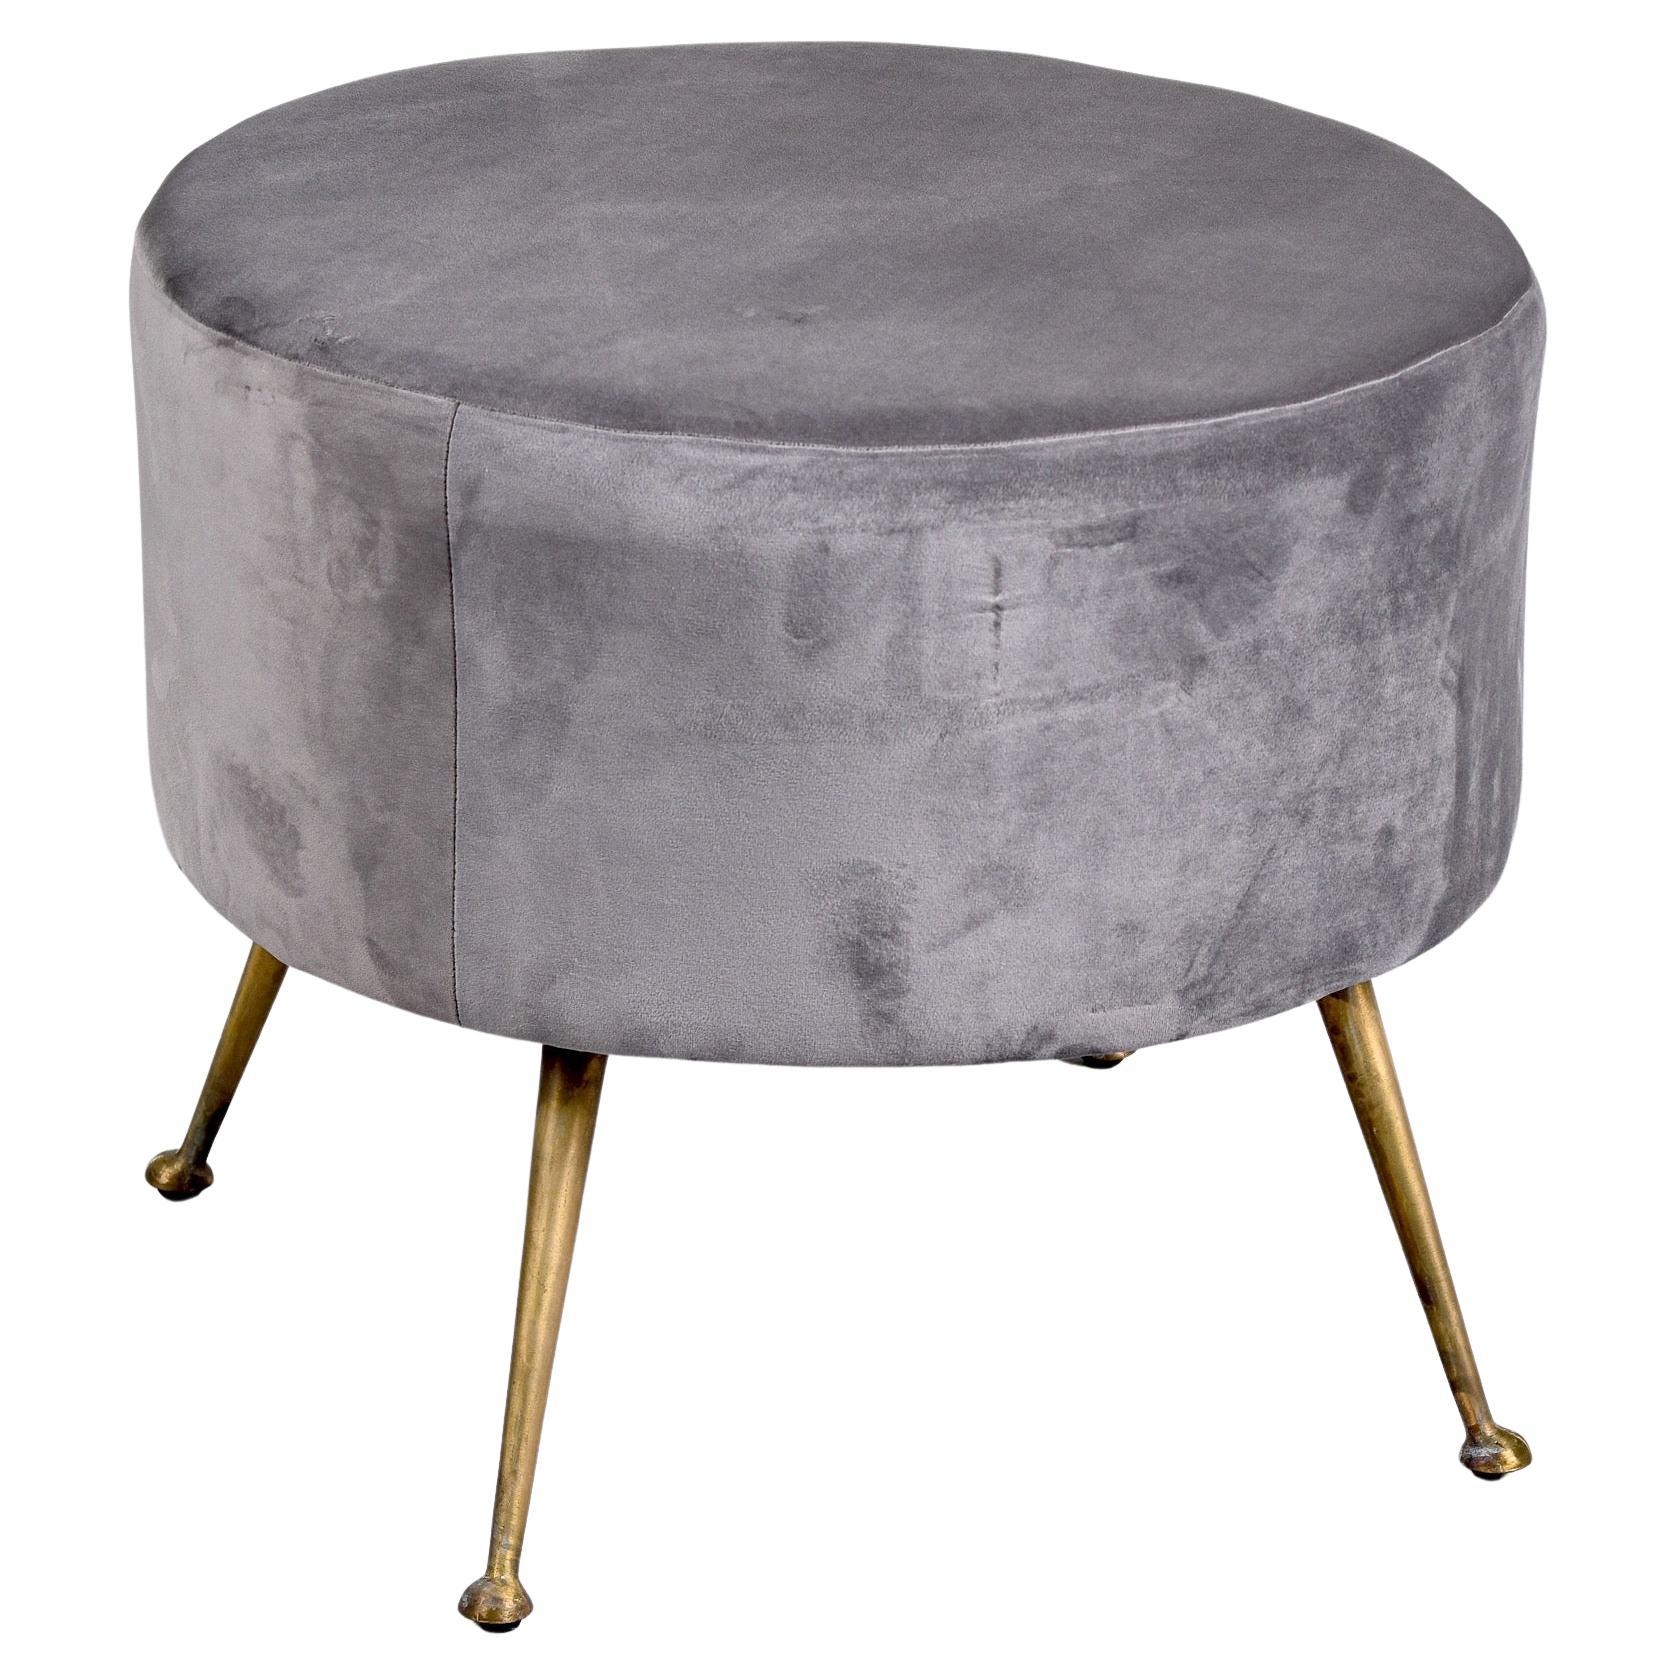 Circa late 1950s / early 1960s Italian round stool with slender brass legs and newer pale gray velvet upholstery. Unknown maker.  Can be shipped via parcel service.
 